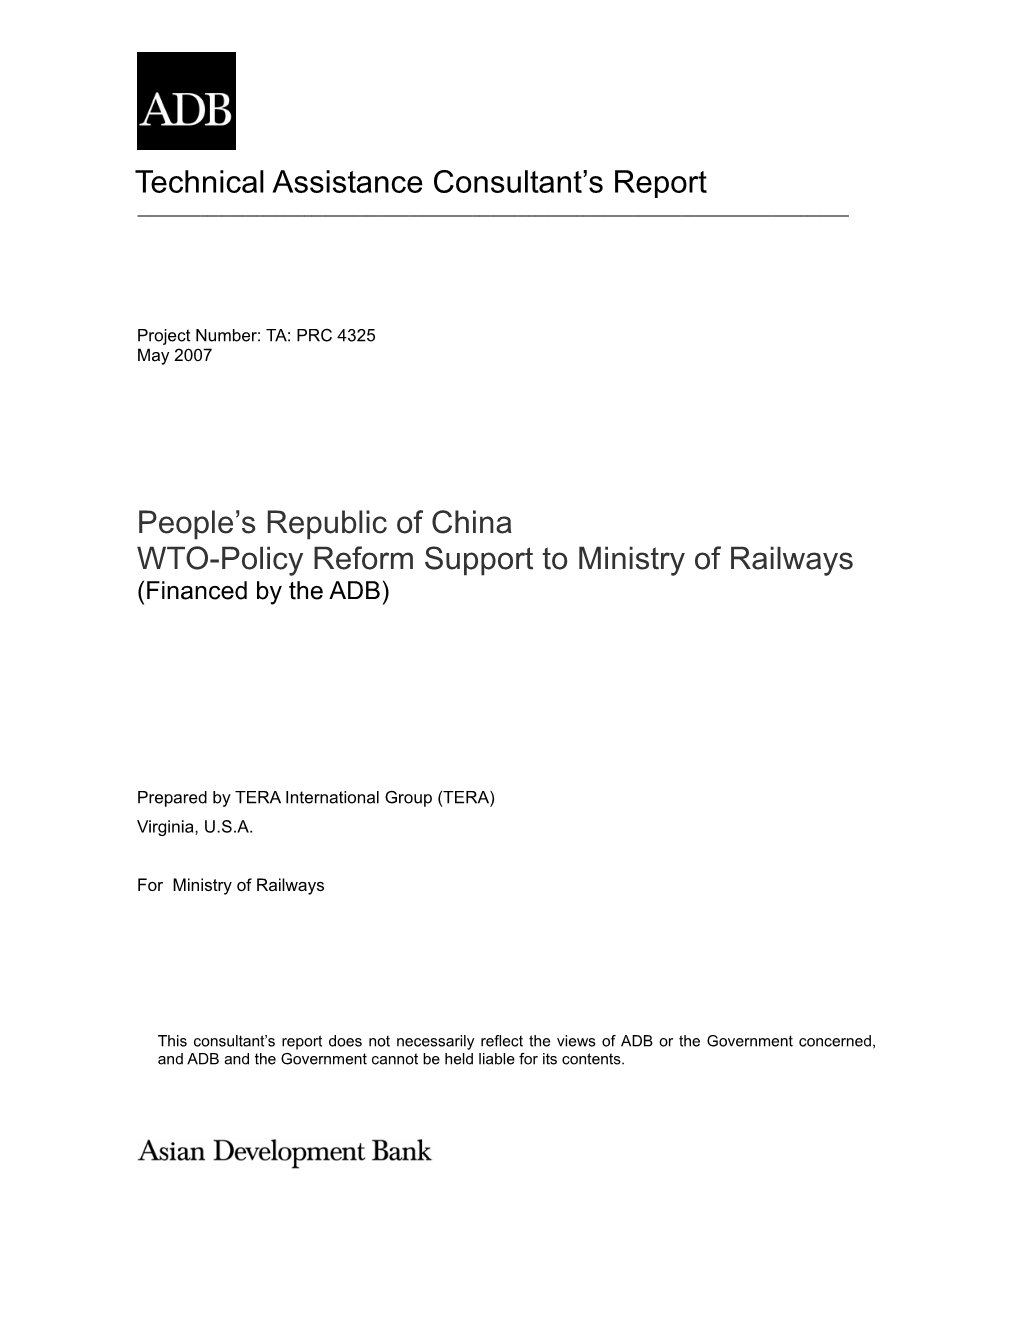 WTO-Policy Reform Support to Ministry of Railways (Financed by the ADB)